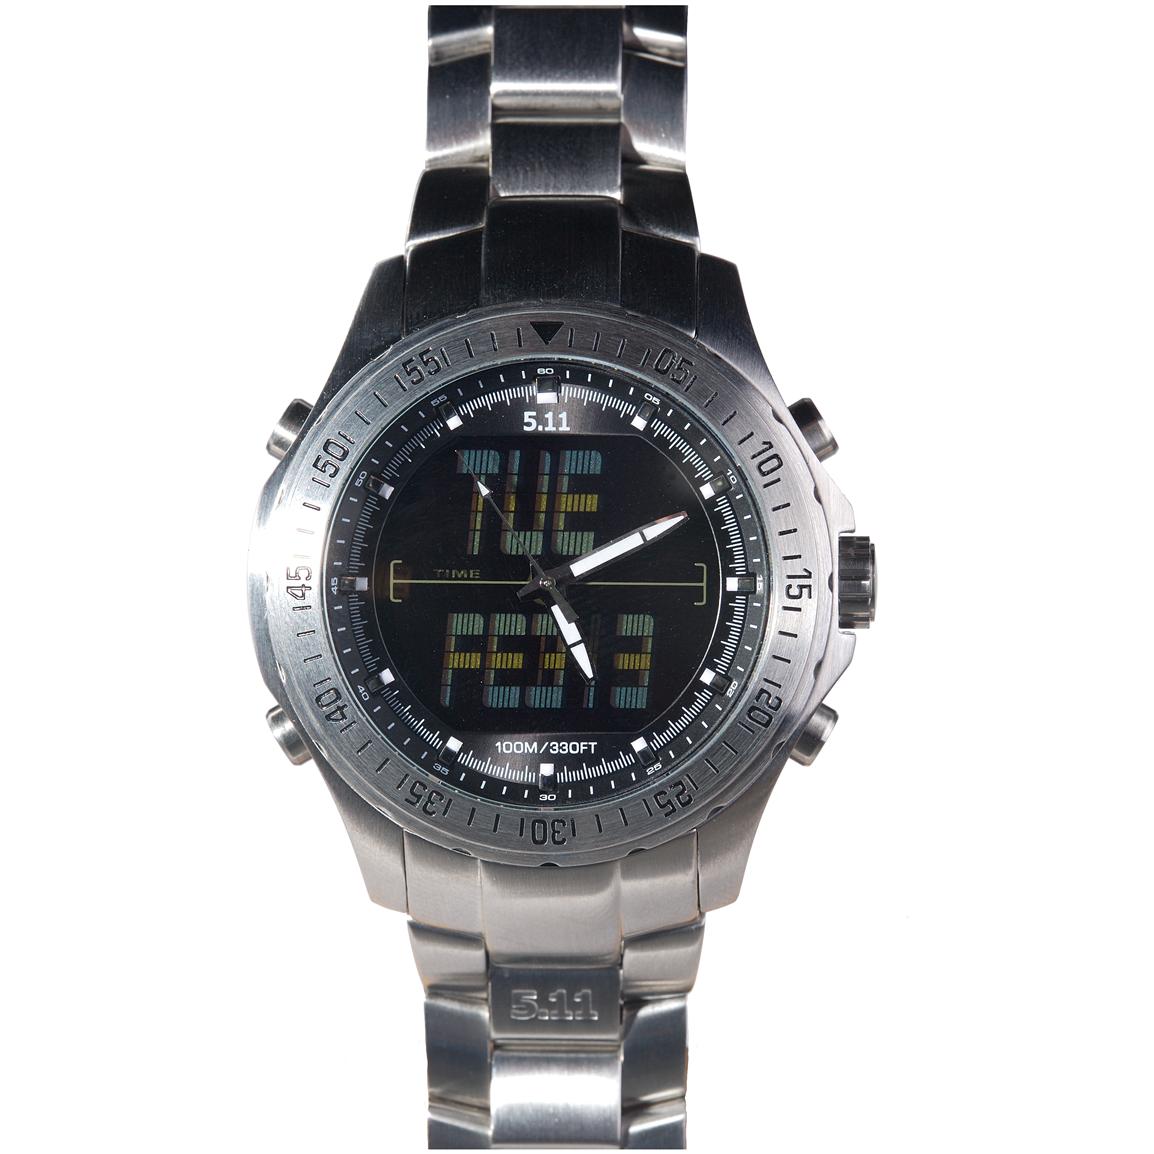 5 11 Tactical® Stainless Steel Hrt Watch 165061 Watches At Sportsman S Guide